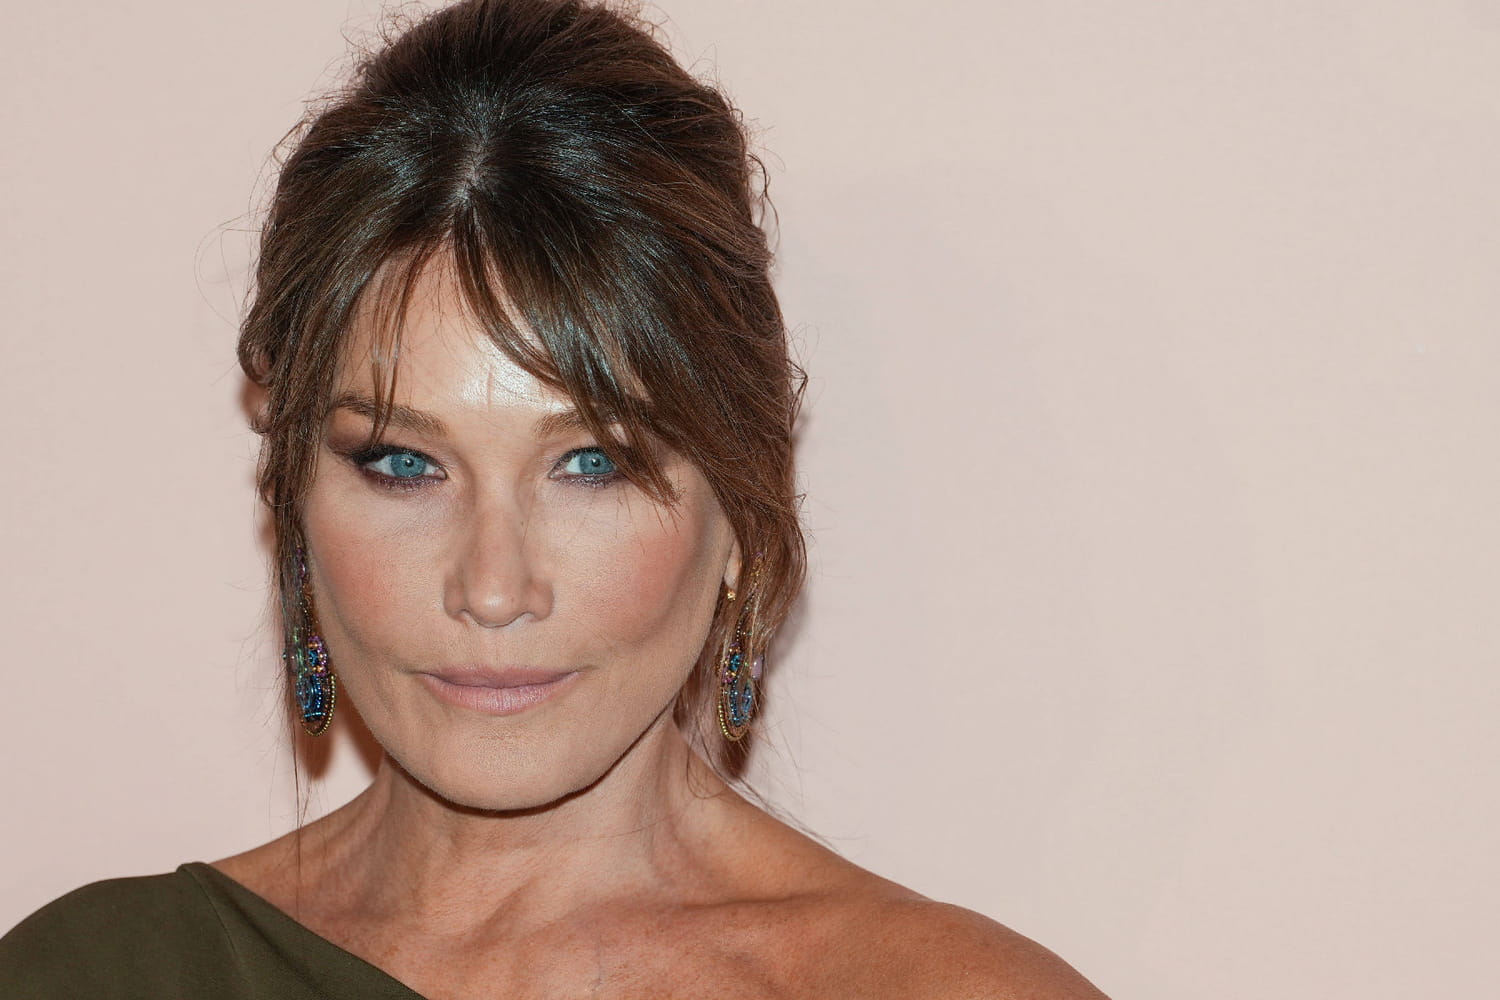 Carla Bruni bets on an outfit costing more than 17,000 euros to go to a super select evening